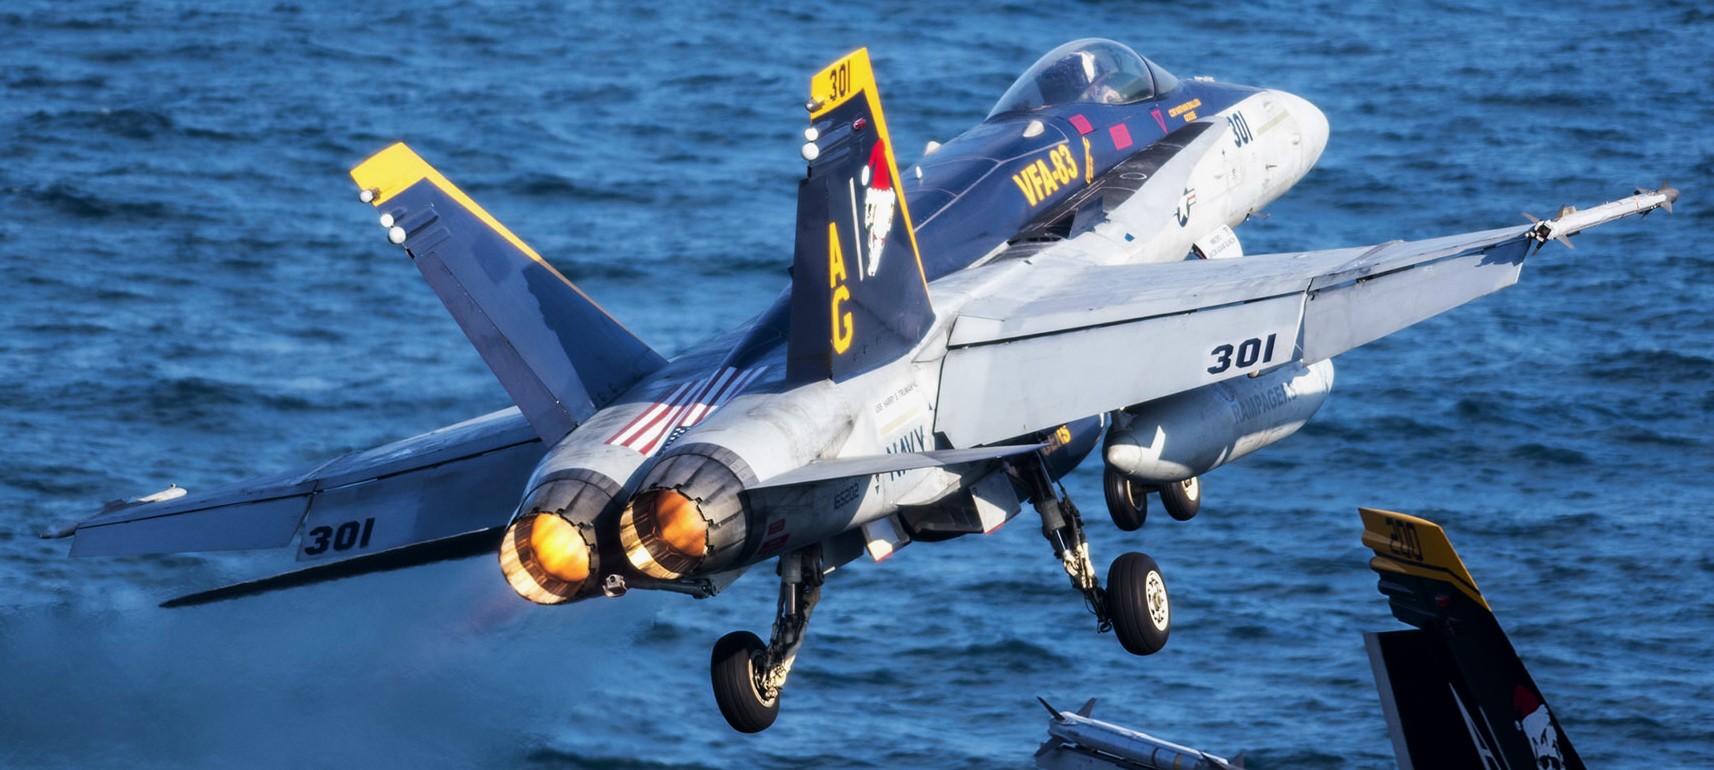 vfa-83 rampagers strike fighter squadron f/a-18c hornet cvw-7 uss harry s. truman cvn-75 36